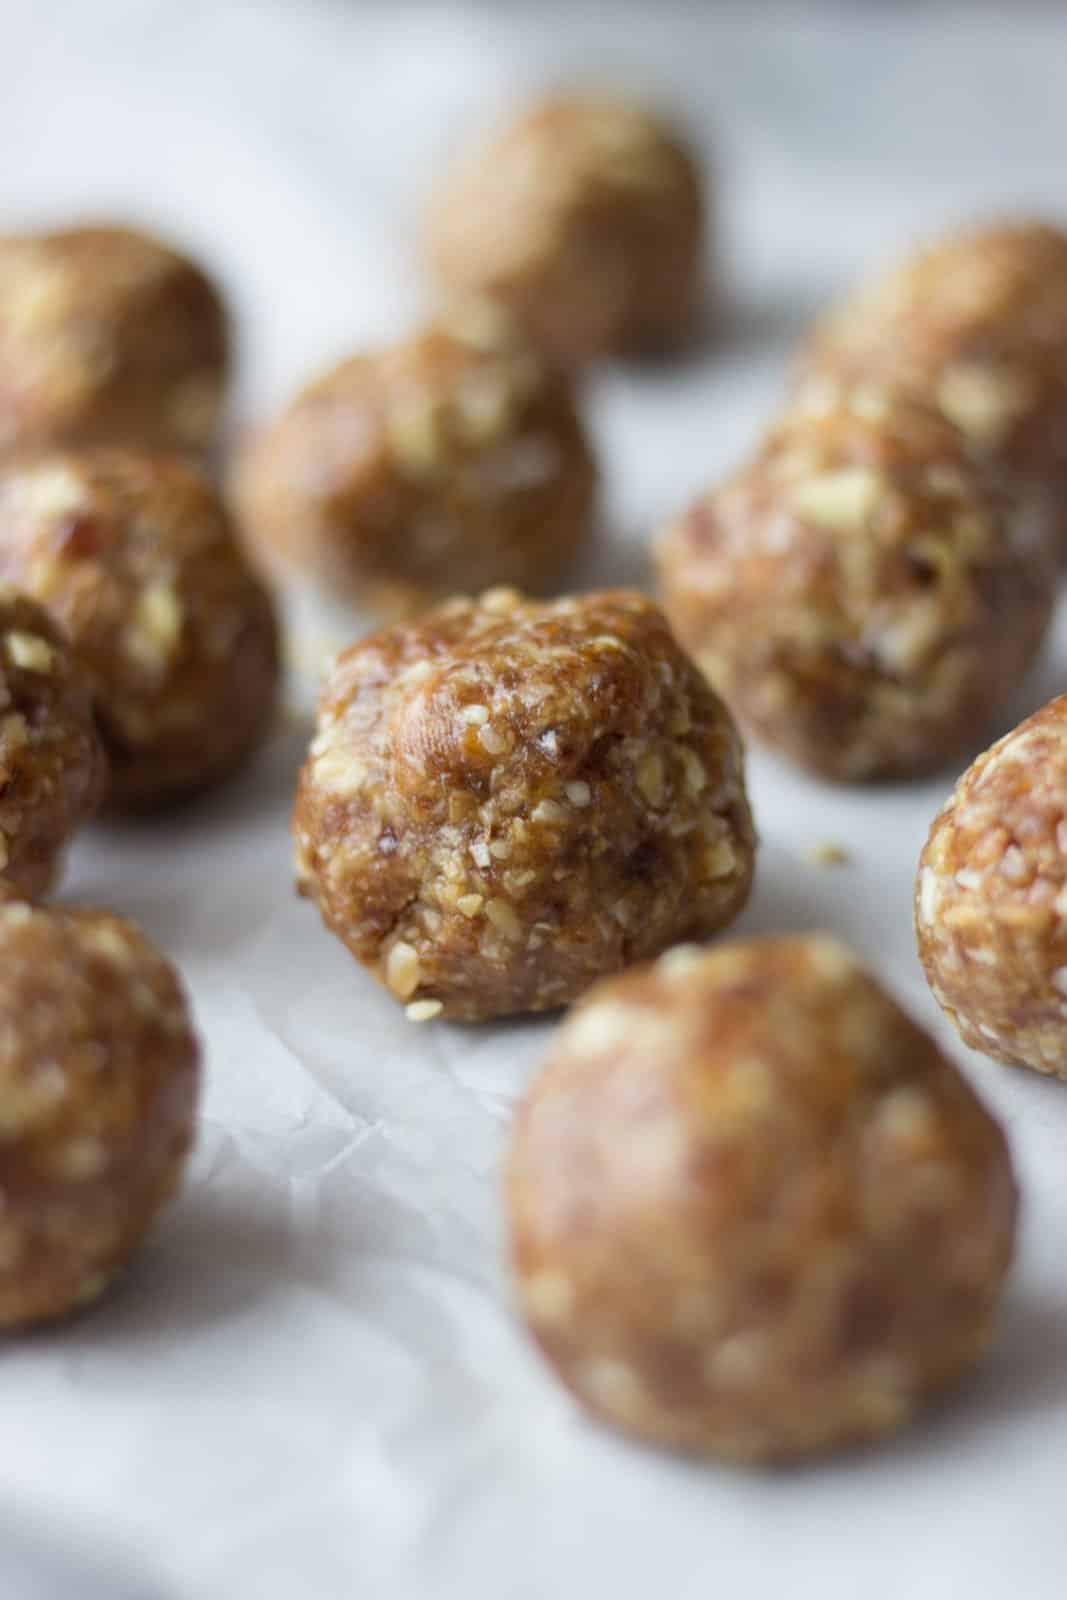 (No Bake) Coconut Date Balls - from Julie Kay Andrews RD